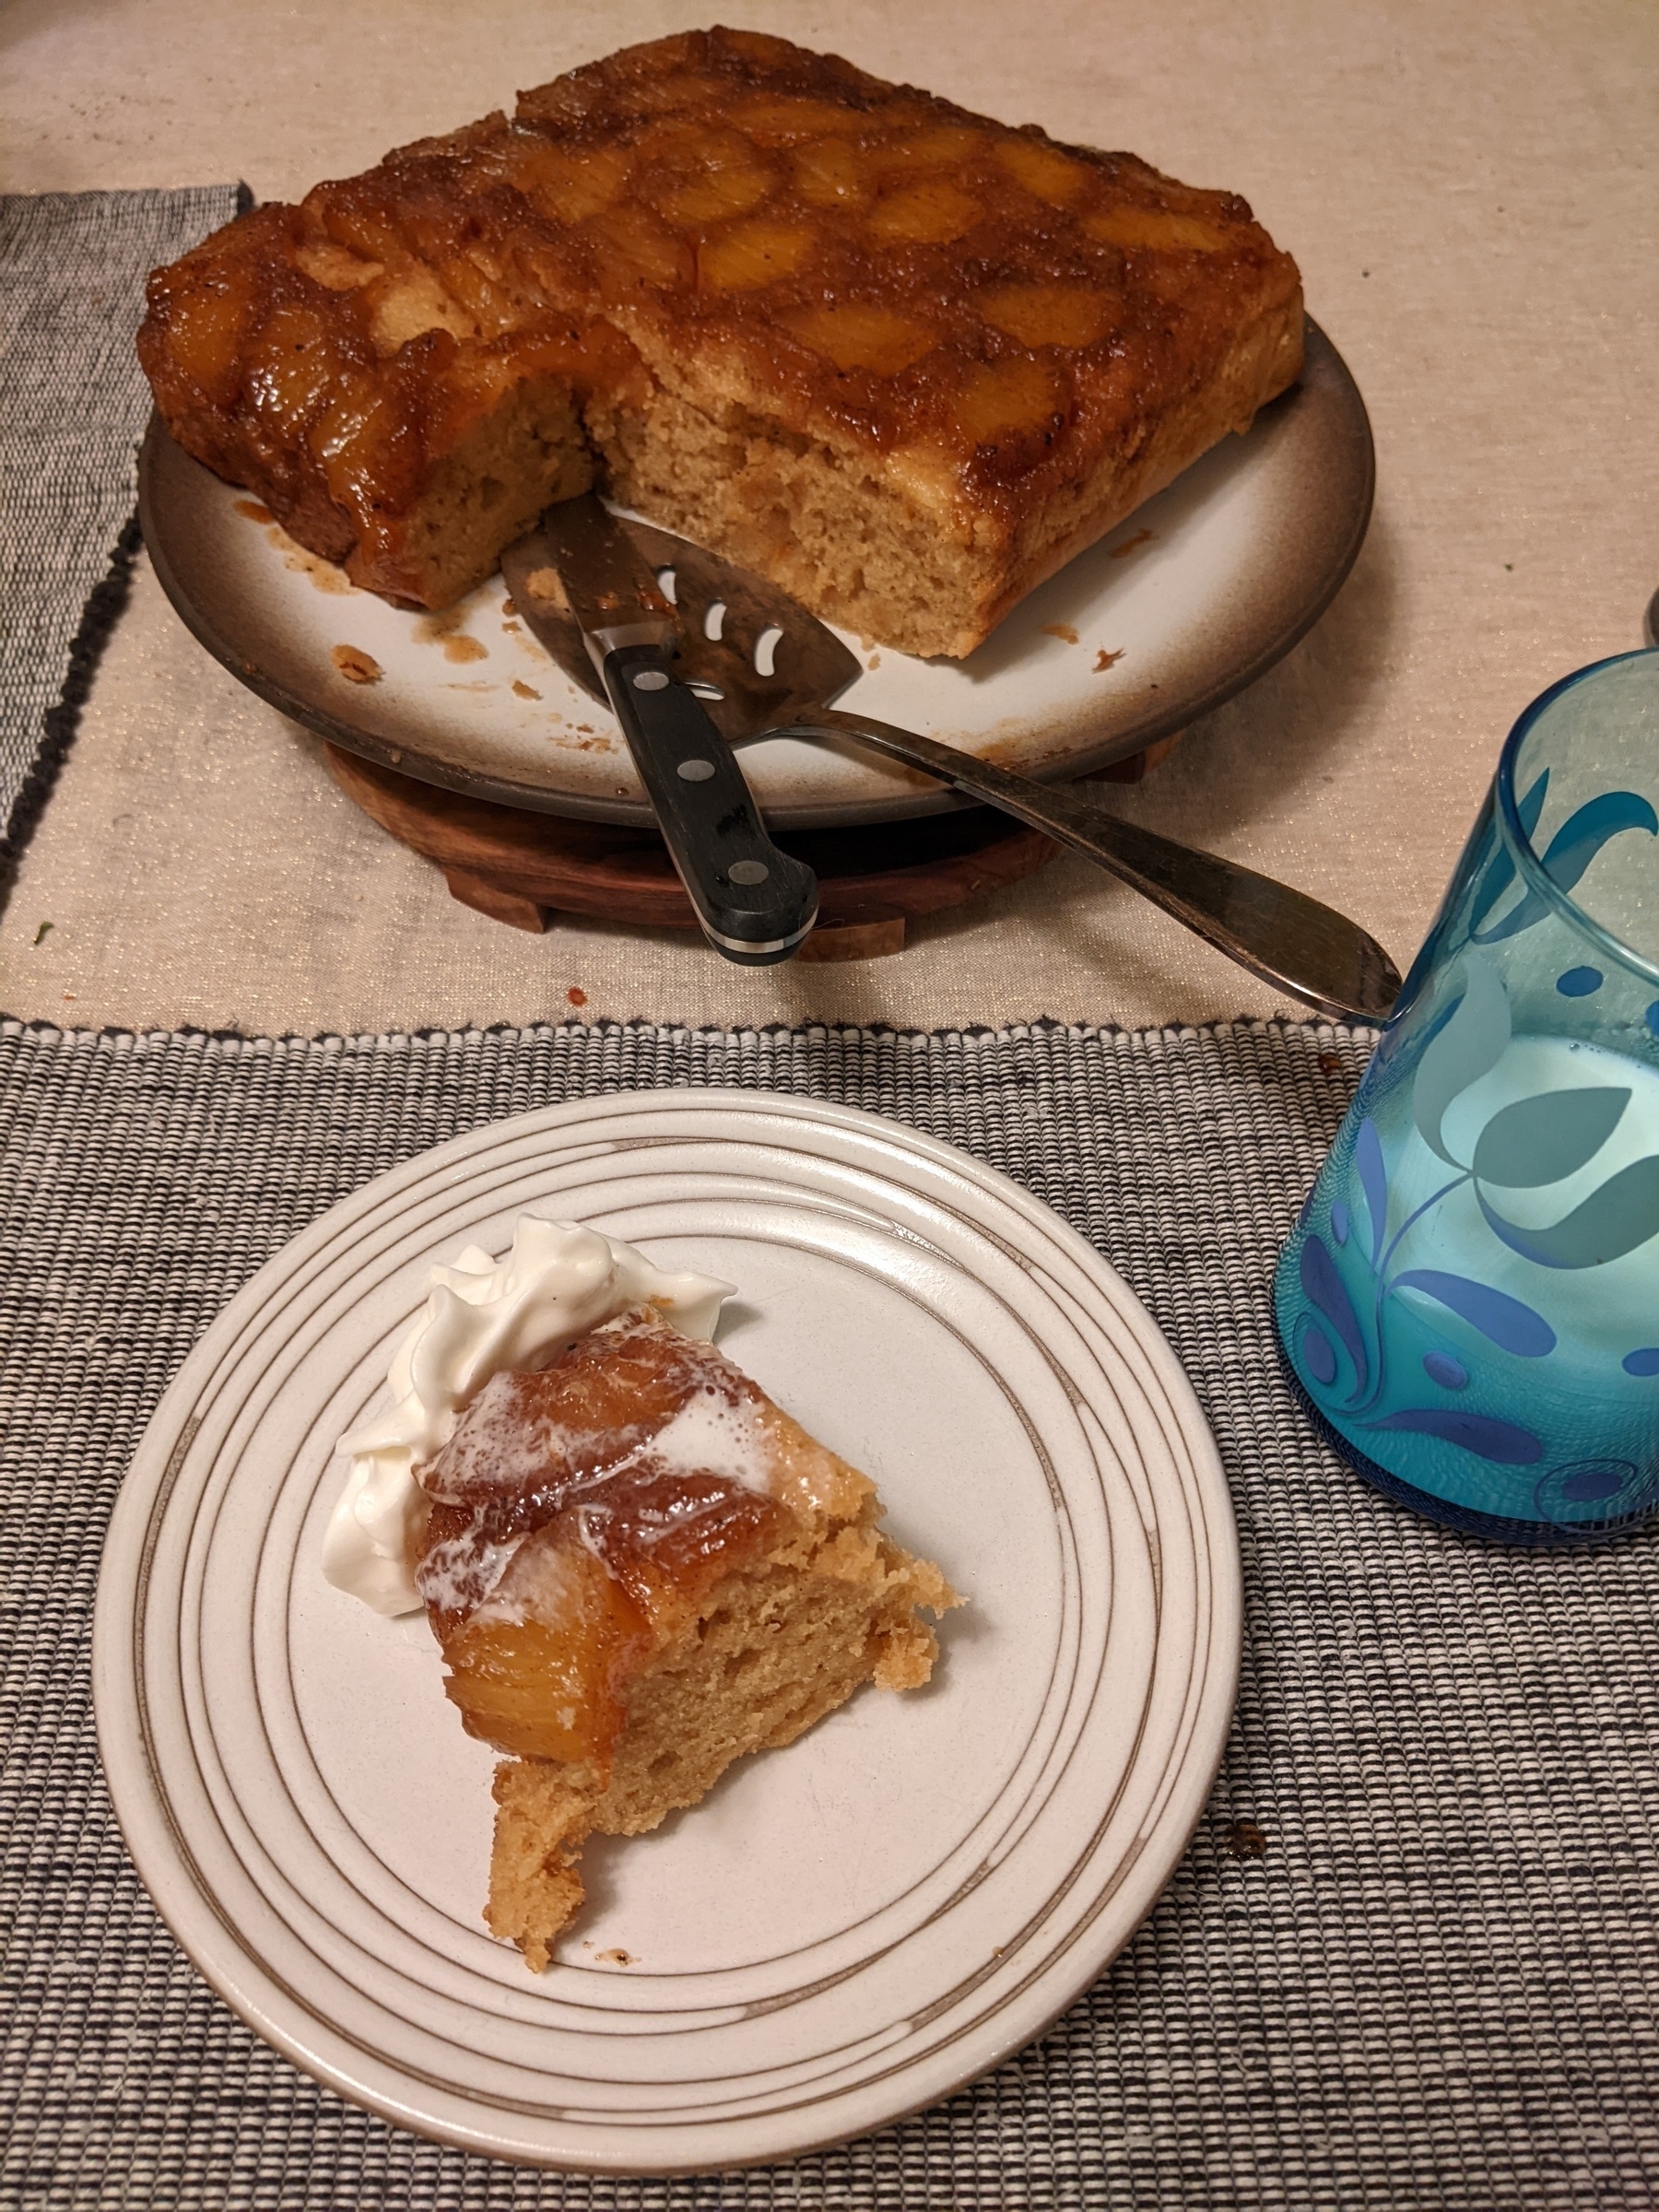 slice of cake with whipped cream next to plate of pineapple upside down cake 